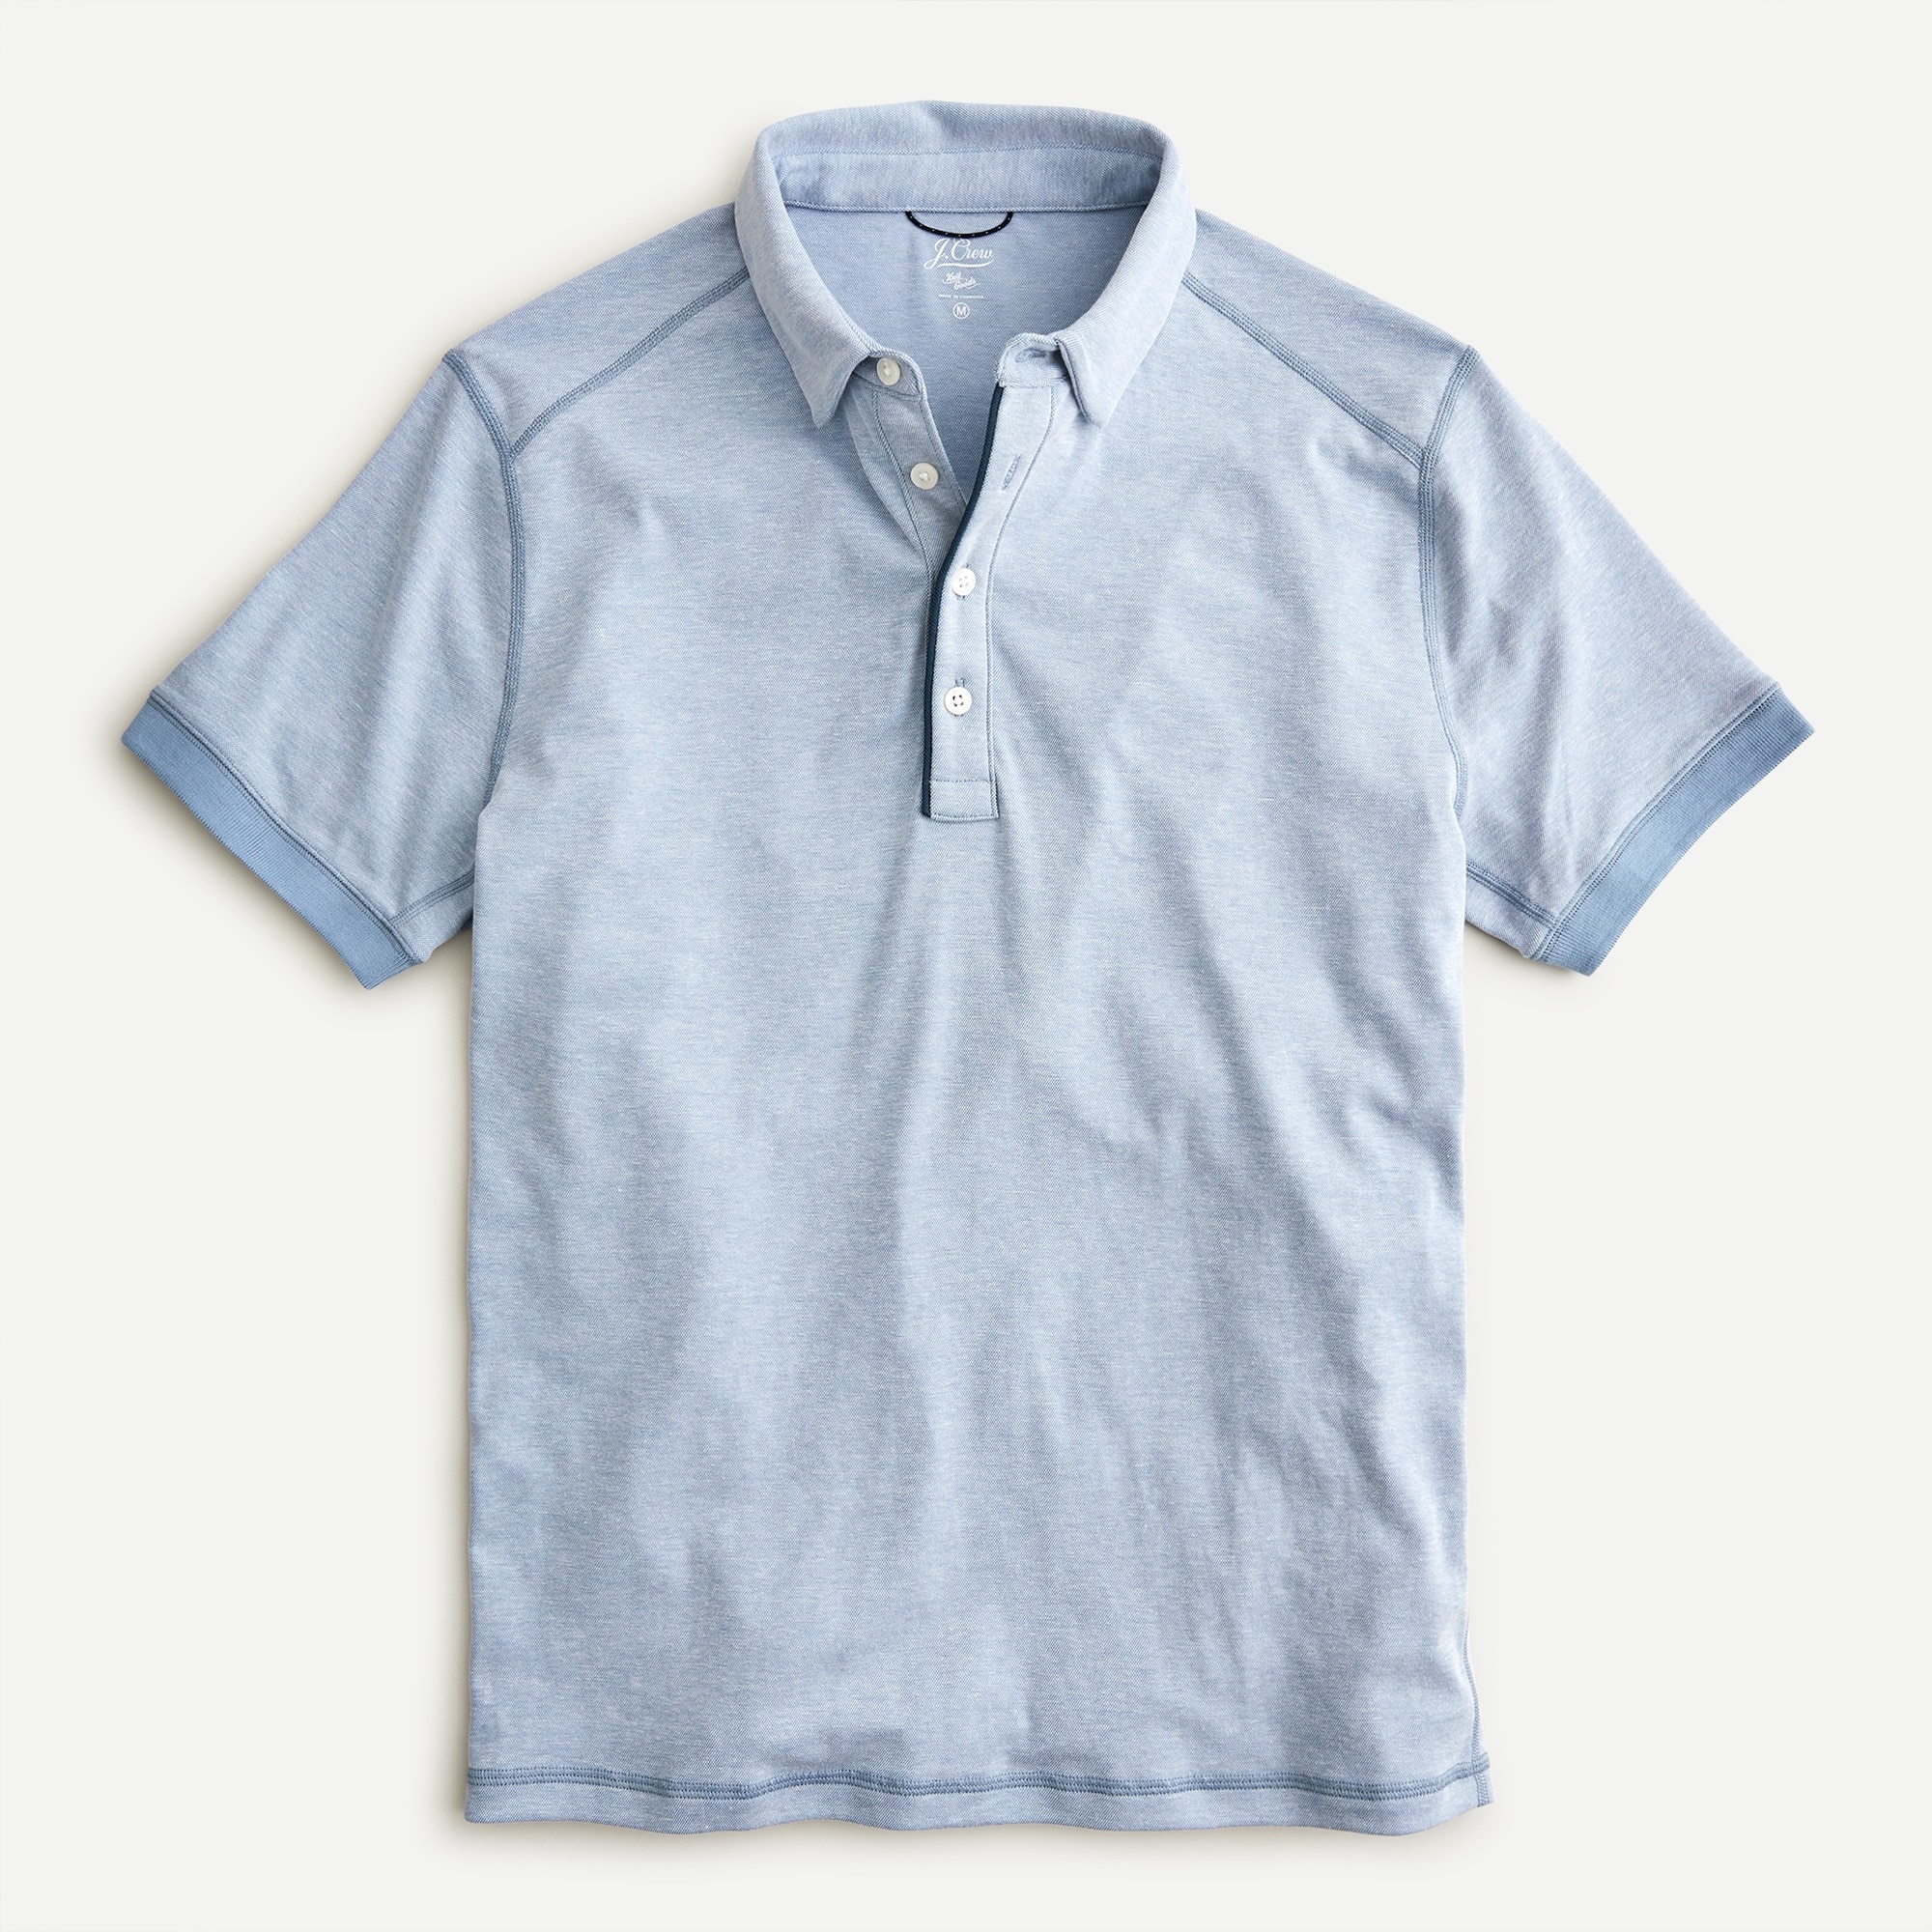 j crew polo shirts,Save up to 18%,www.ilcascinone.com